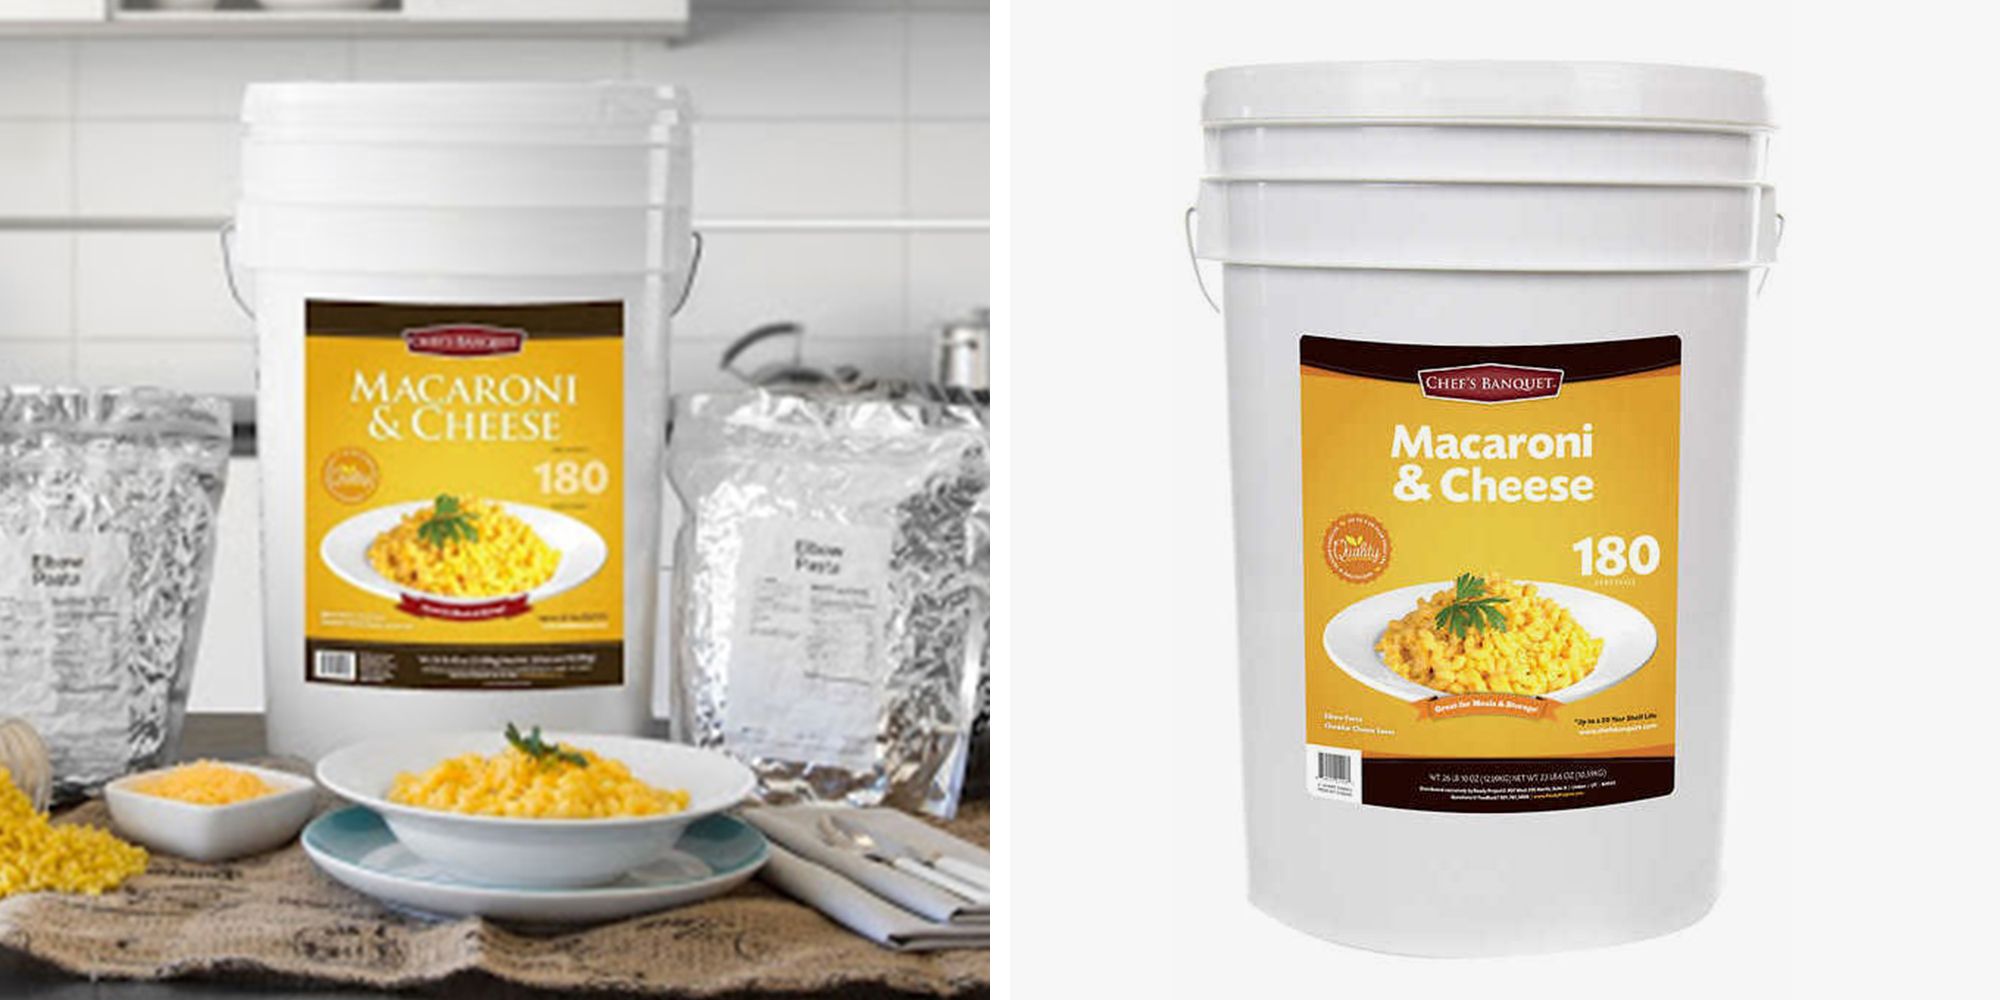 Amazon Is Selling a 27-Pound Bucket of Macaroni and Cheese, Which